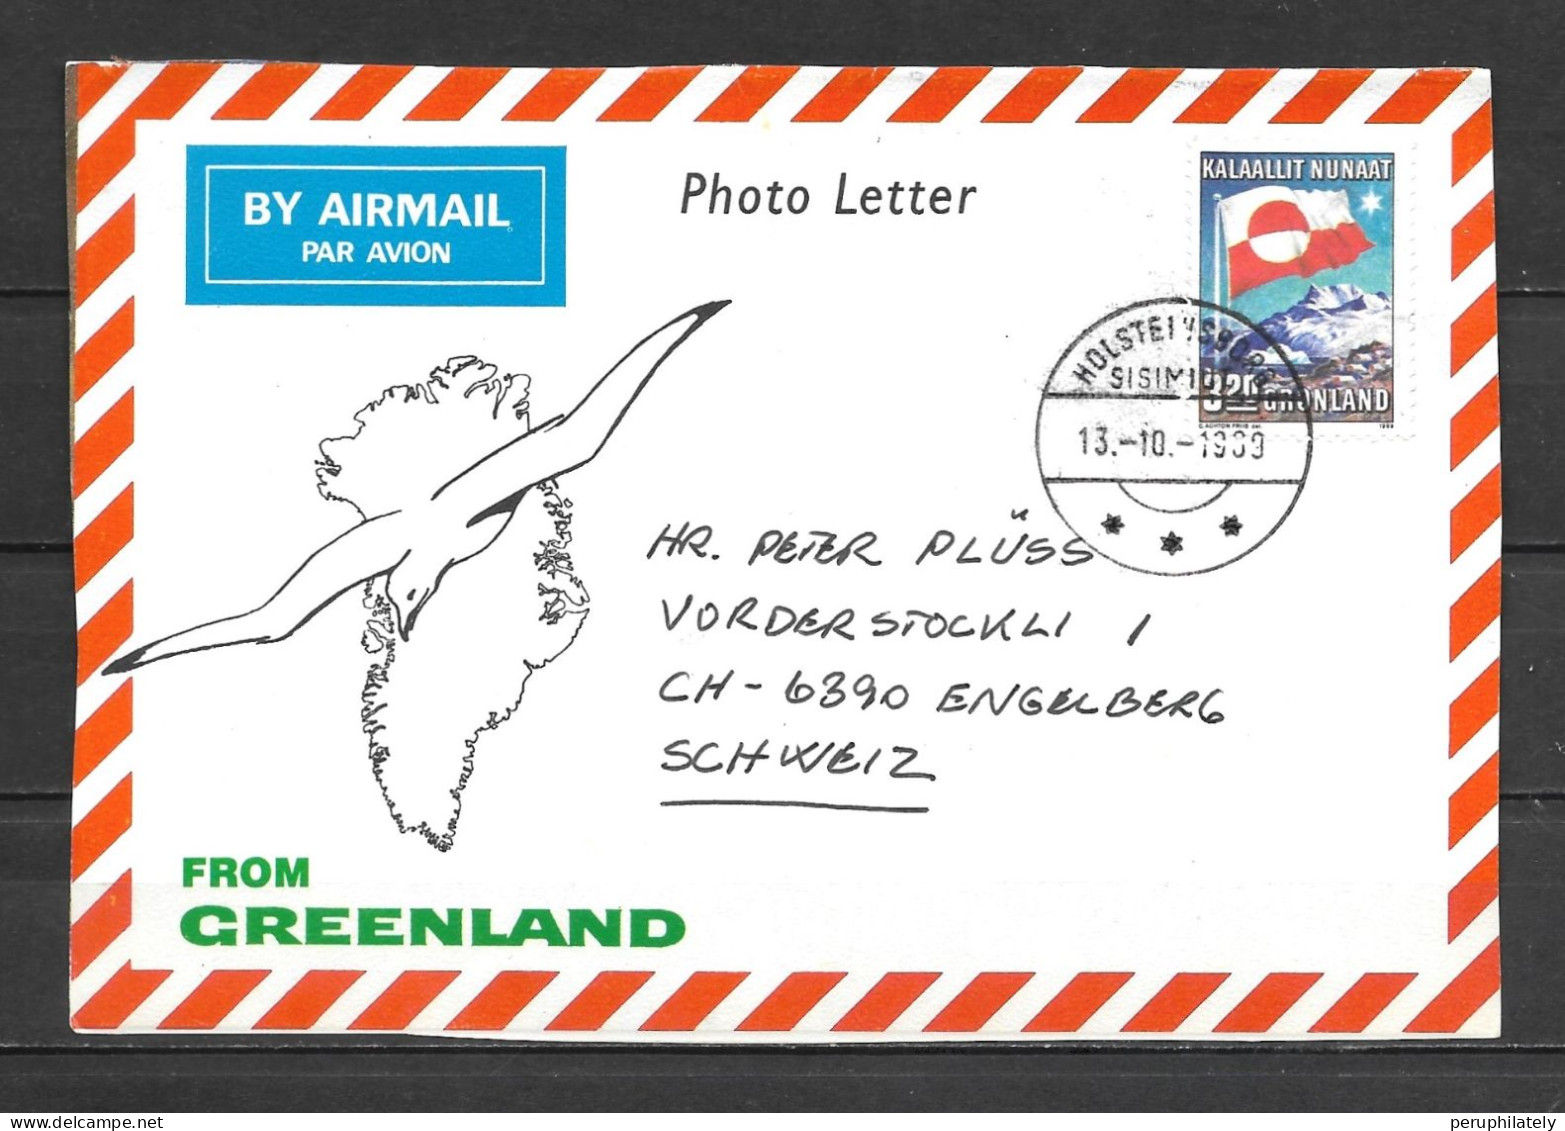 Greenland Photo Letter Fragment , Holsteinborg Sent To Switzerland - Covers & Documents